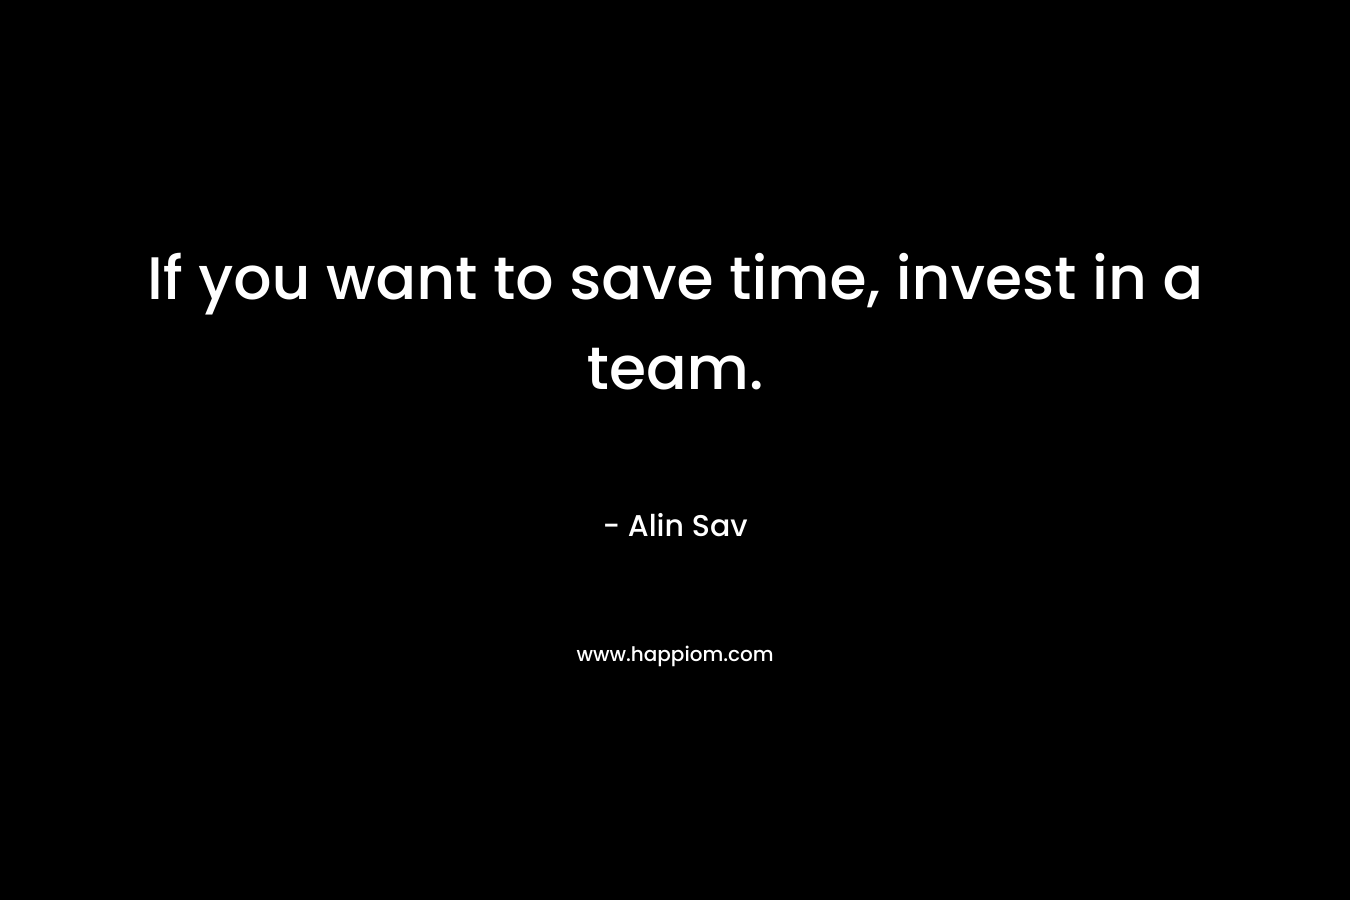 If you want to save time, invest in a team. – Alin Sav